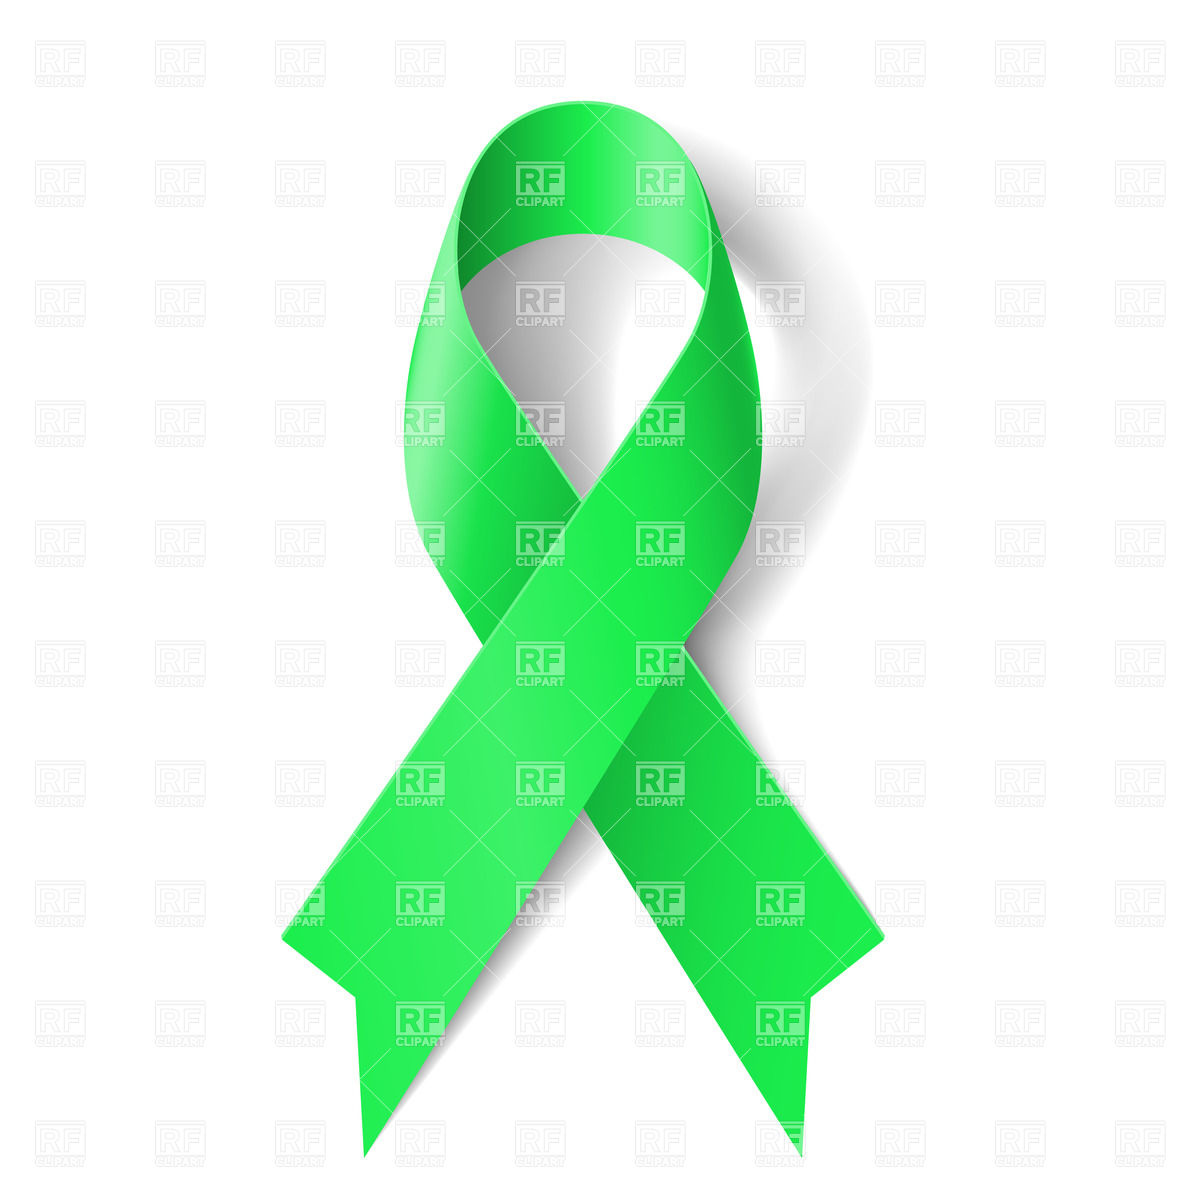 Kidney Cancer Awareness Green Ribbon 26028 Objects Download Royalty